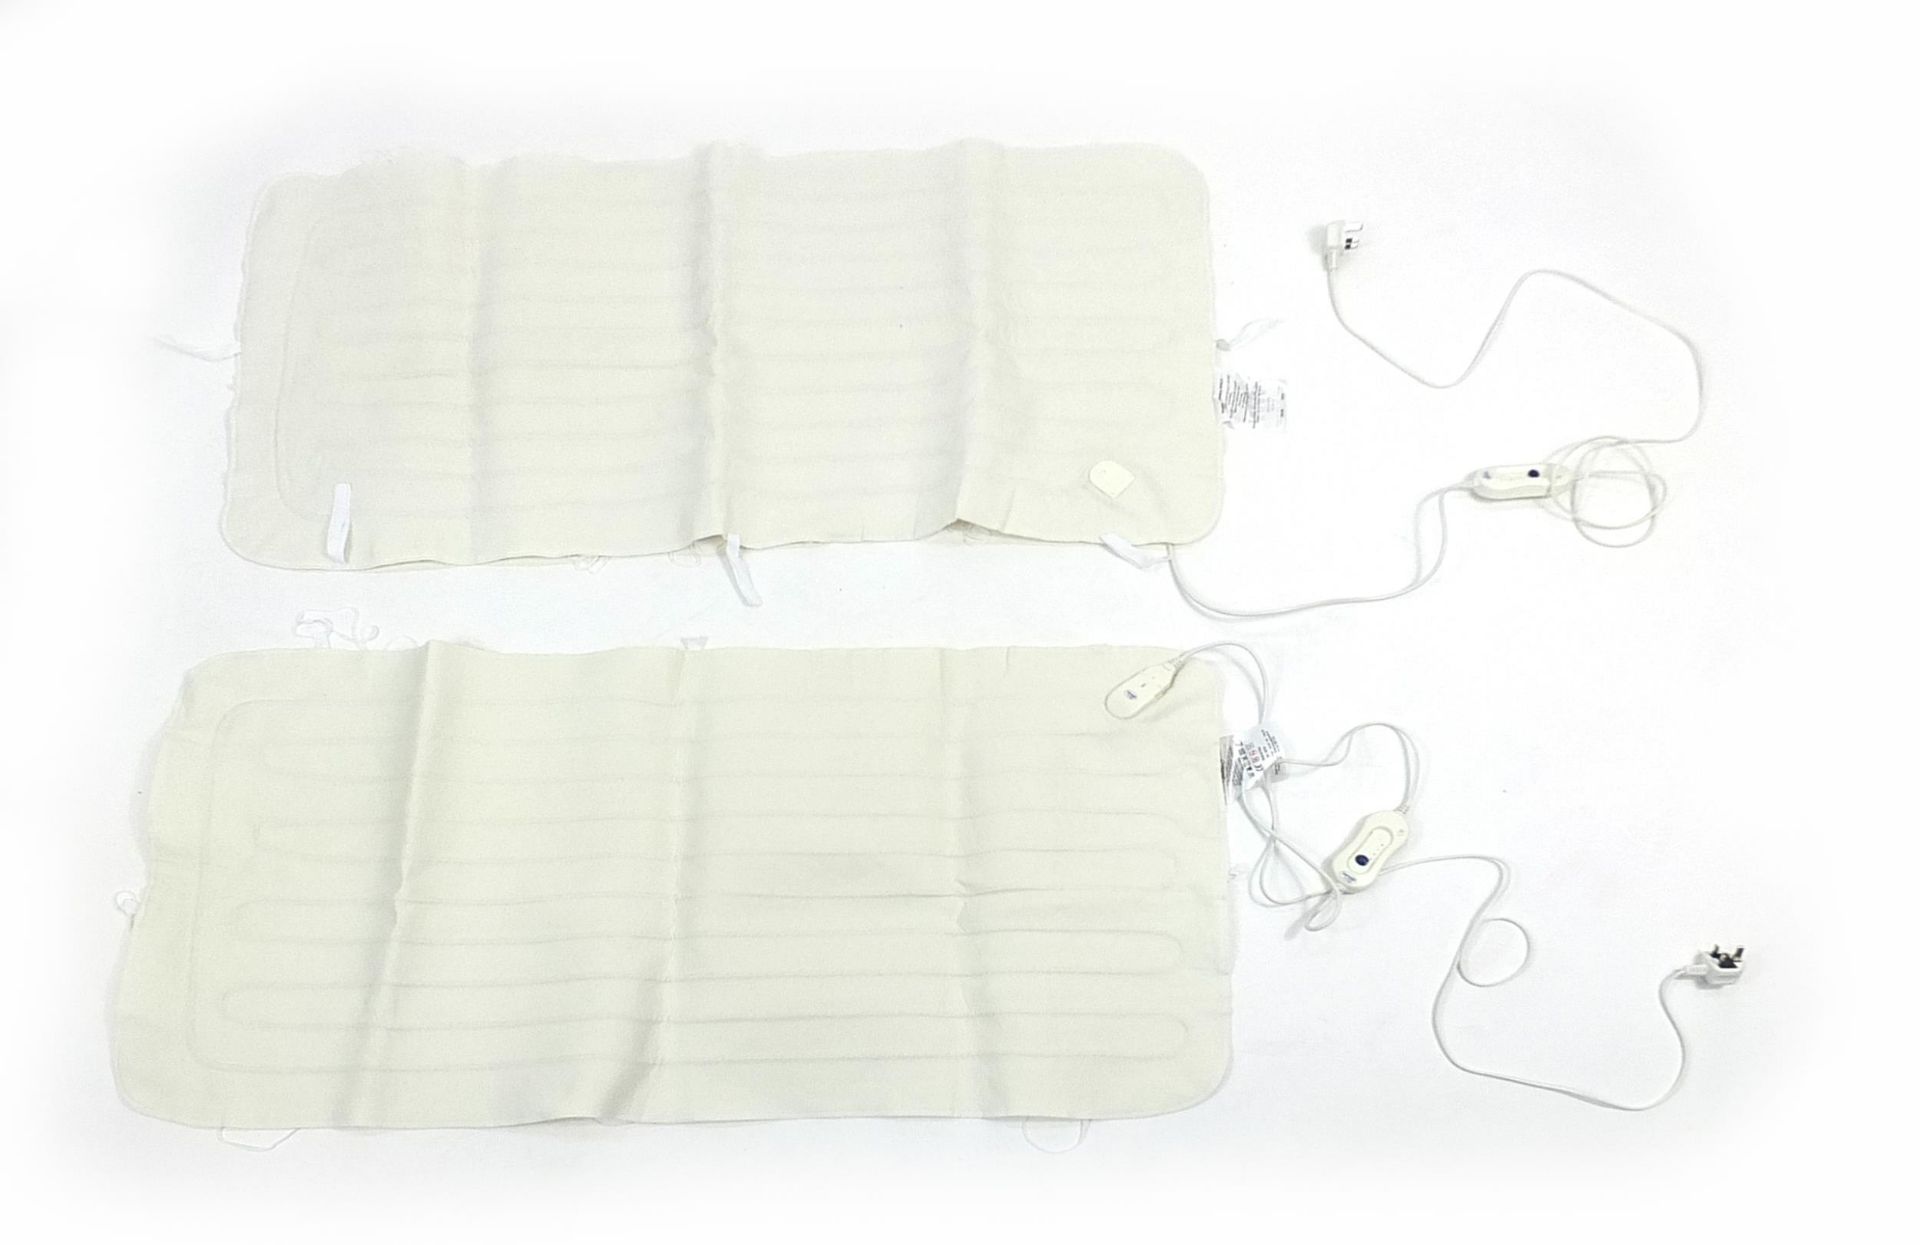 Two as new single Silentnight Comfort electric blankets - Image 2 of 3